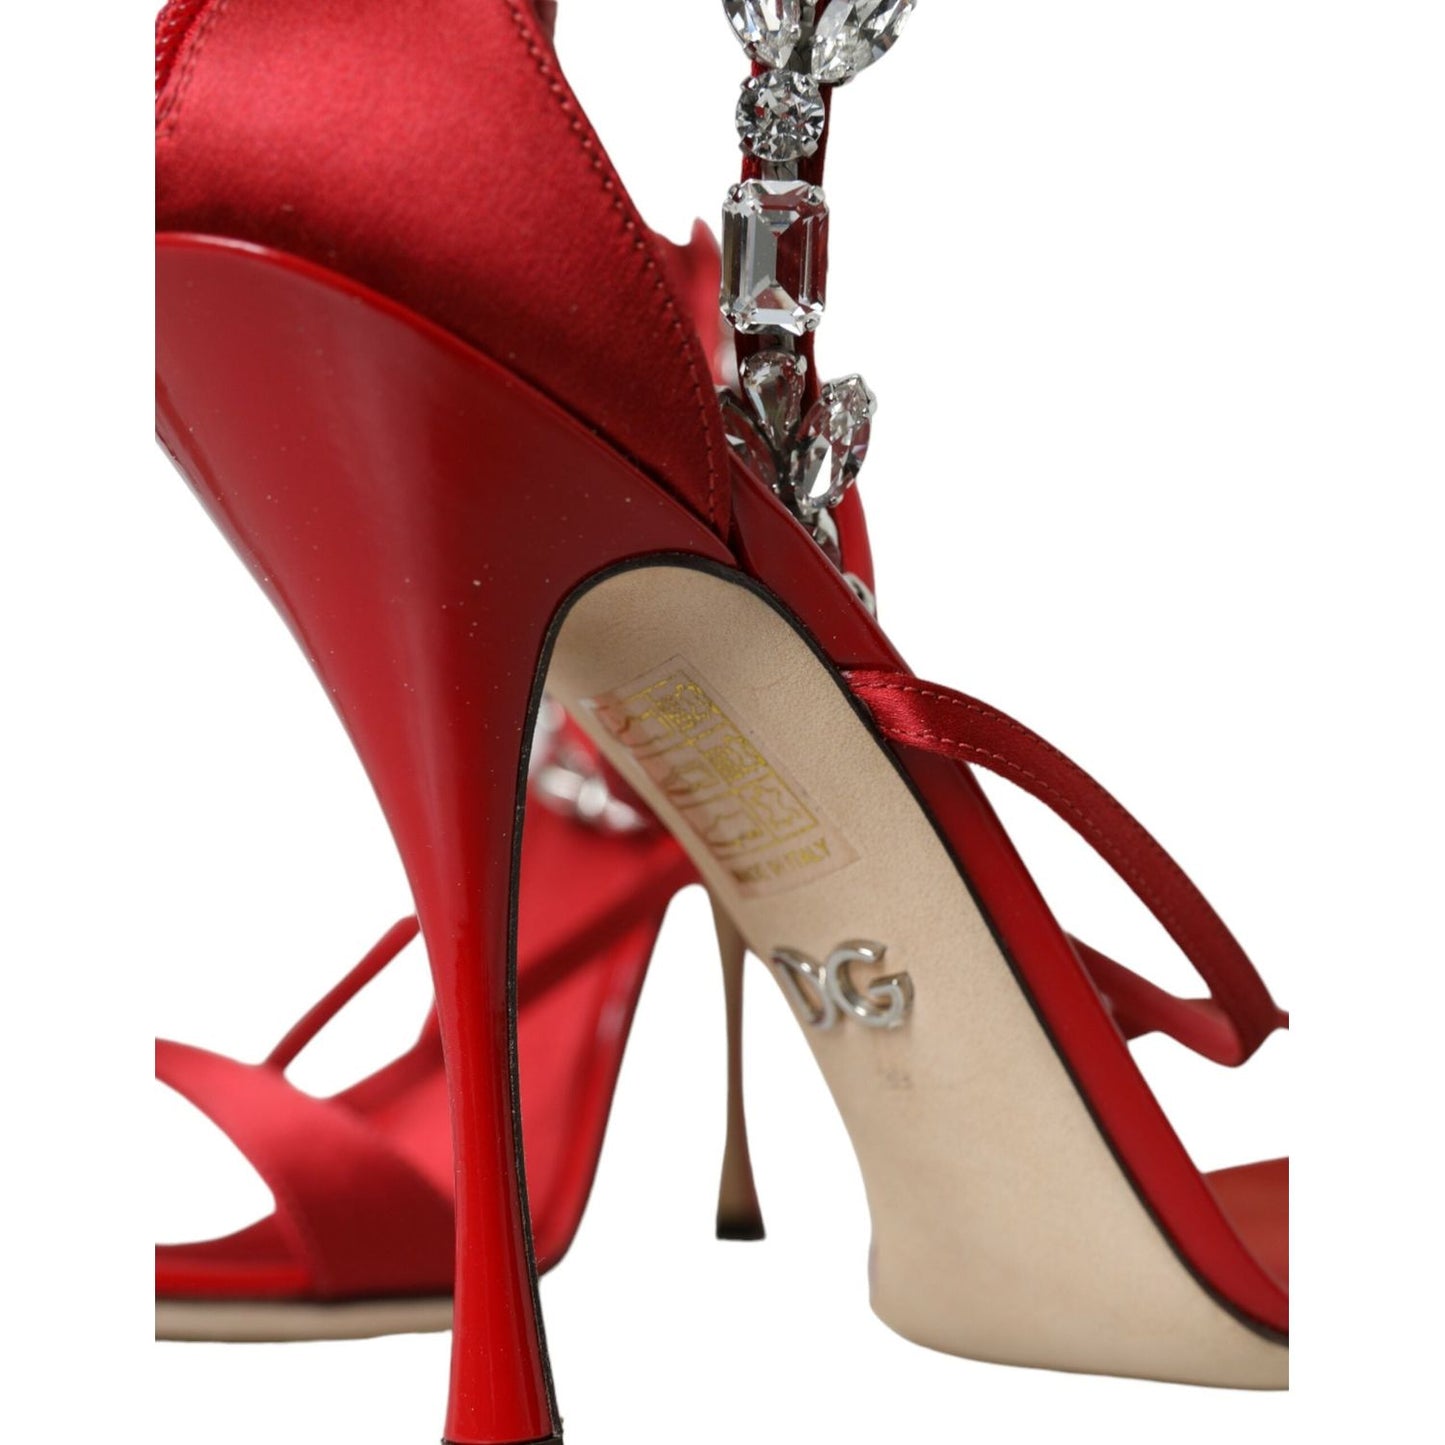 Dolce & Gabbana Keira Red Satin Crystals Sandals Heels Shoes keira-red-satin-crystals-sandals-heels-shoes